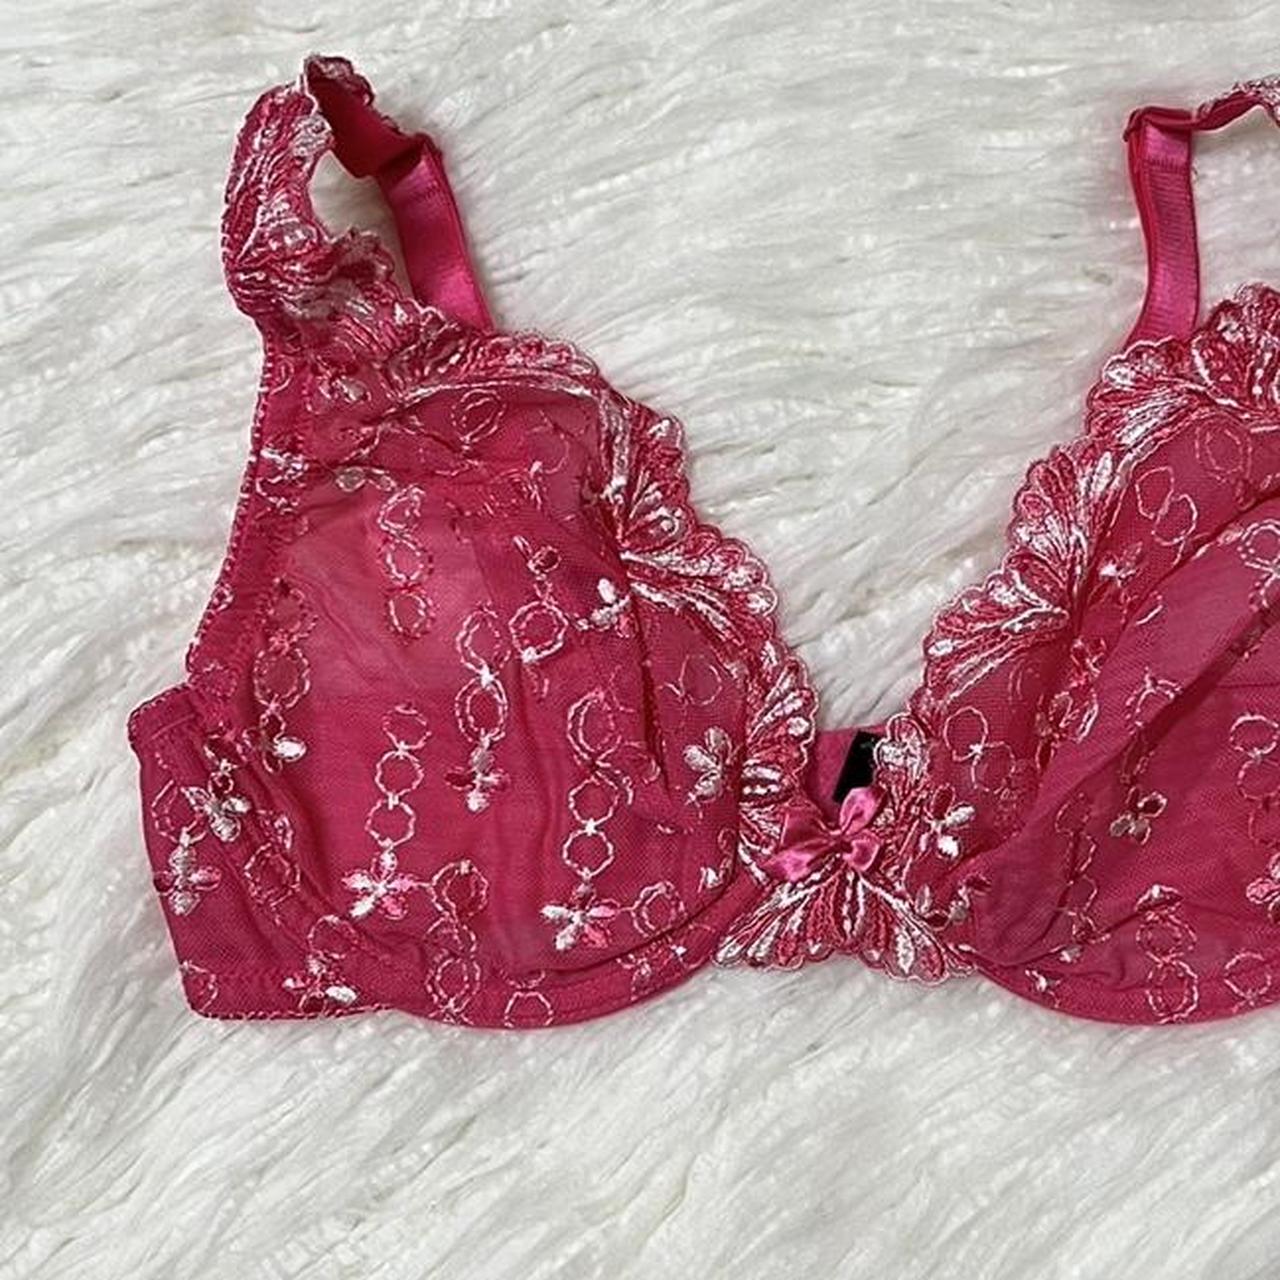 Frederick's of Hollywood Women's Pink Bra (3)